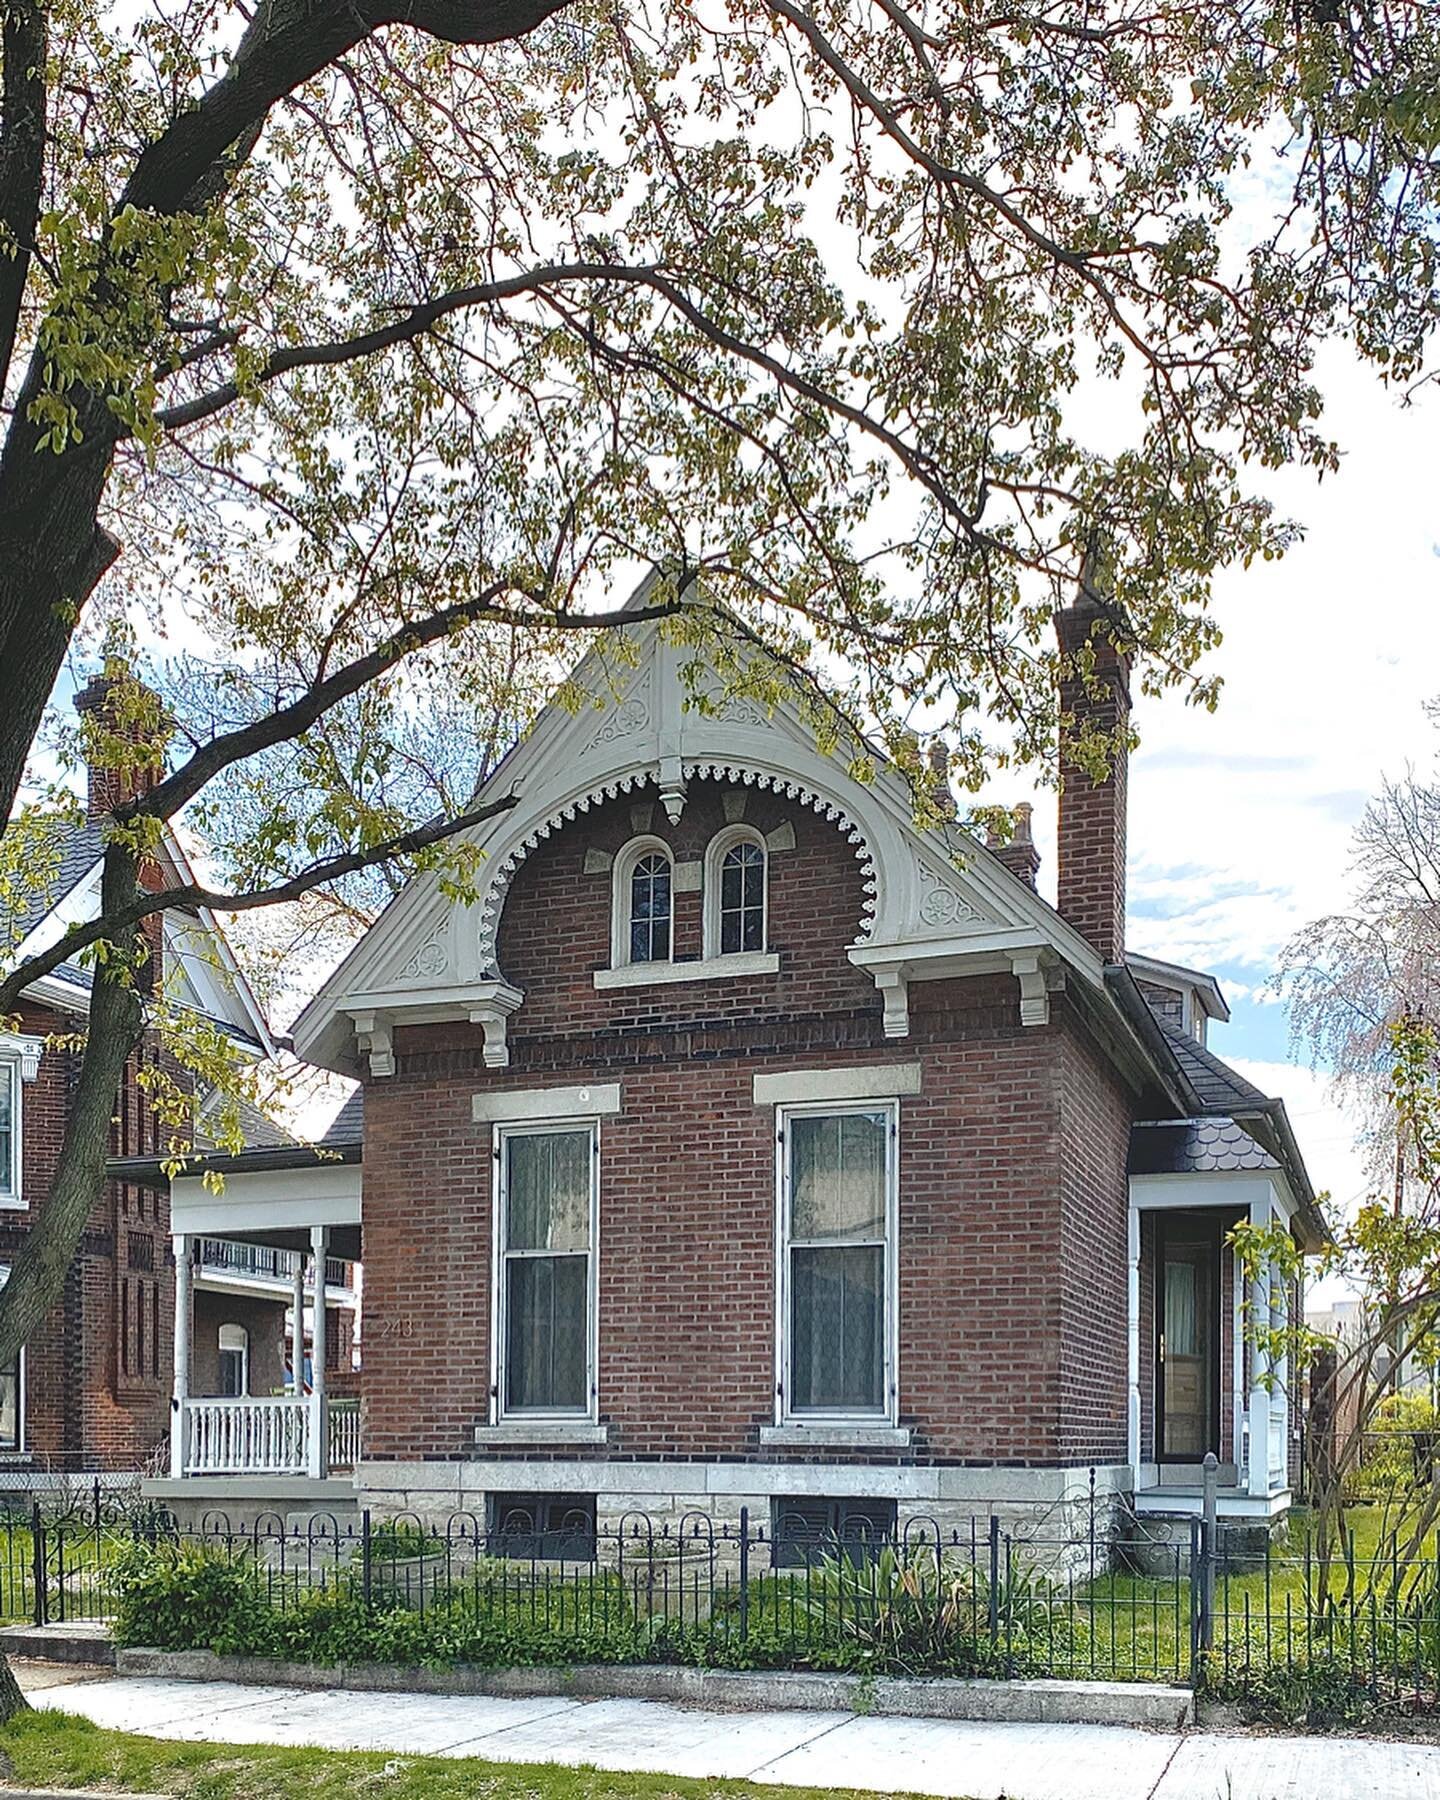 An 1886 Victorian cottage with gingerbread trim in South Park. 
The South Park neighborhood was platted in the mid-1800&rsquo;s and was originally known as &ldquo;Slidertown&rdquo; named after Dayton minister, Rev. Slider. In the 1880&rsquo;s Slidert